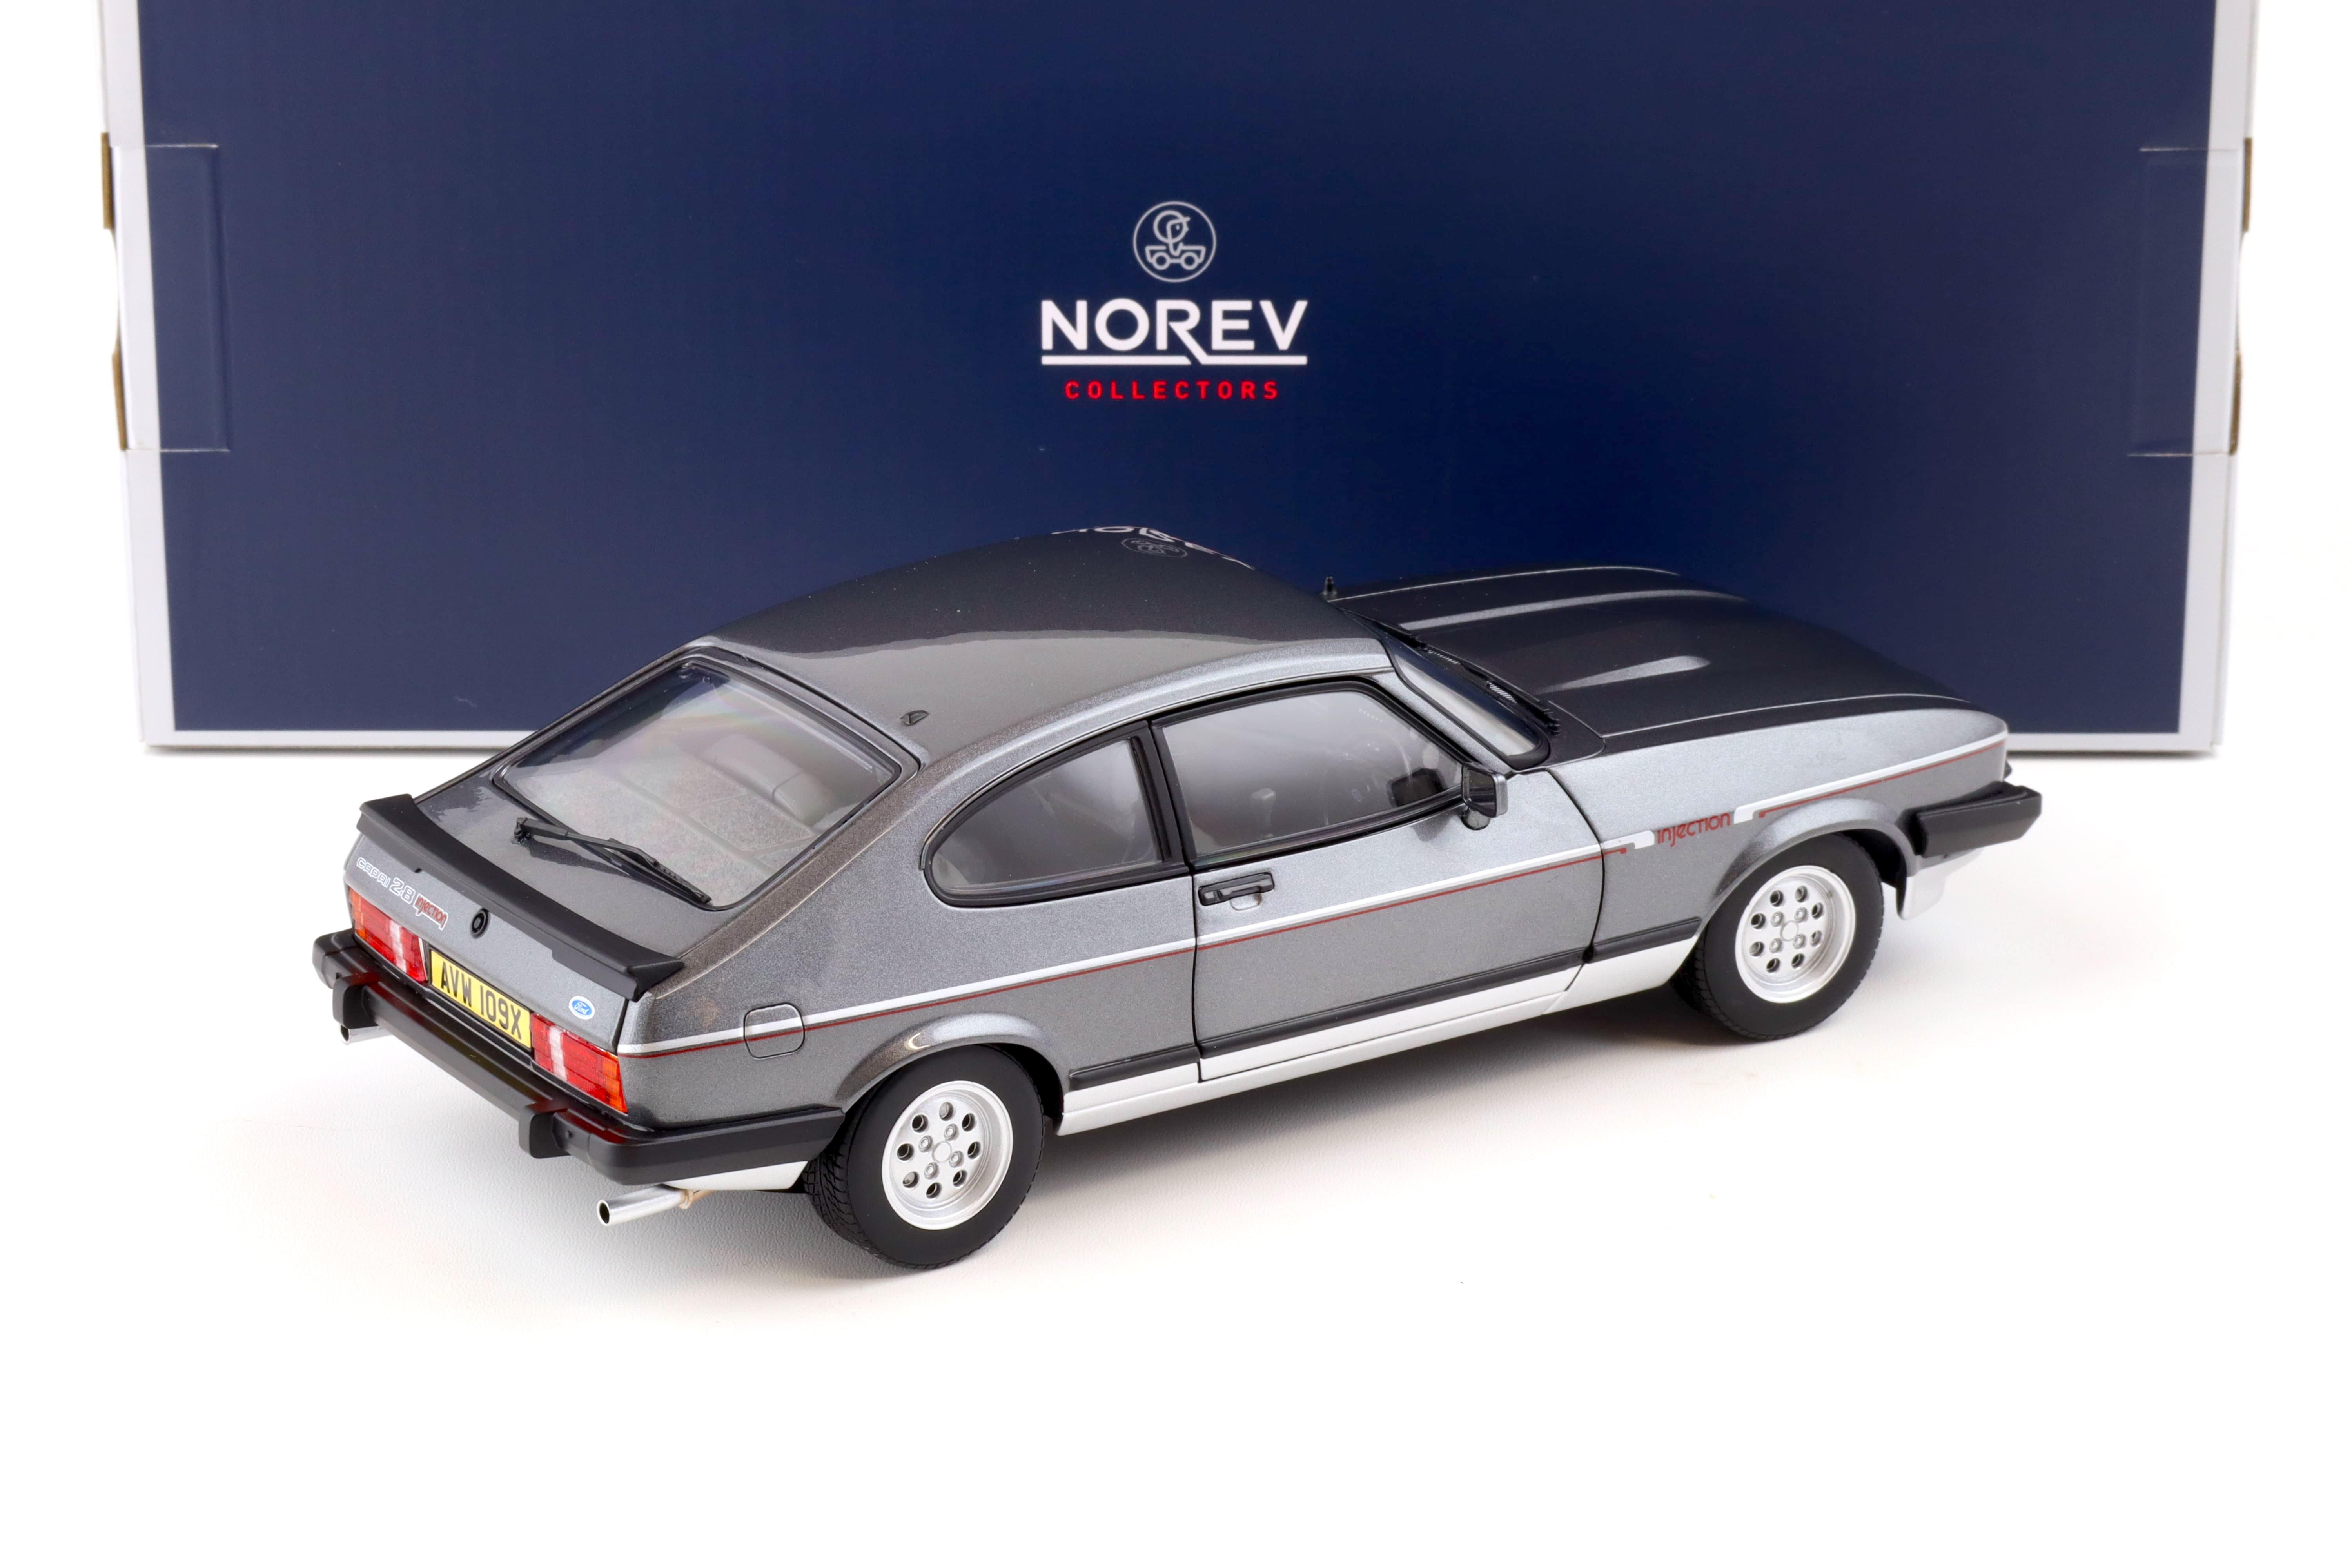 1:18 Norev Ford Capri 2.8i Injection RHD Coupe 1981 grey metallic